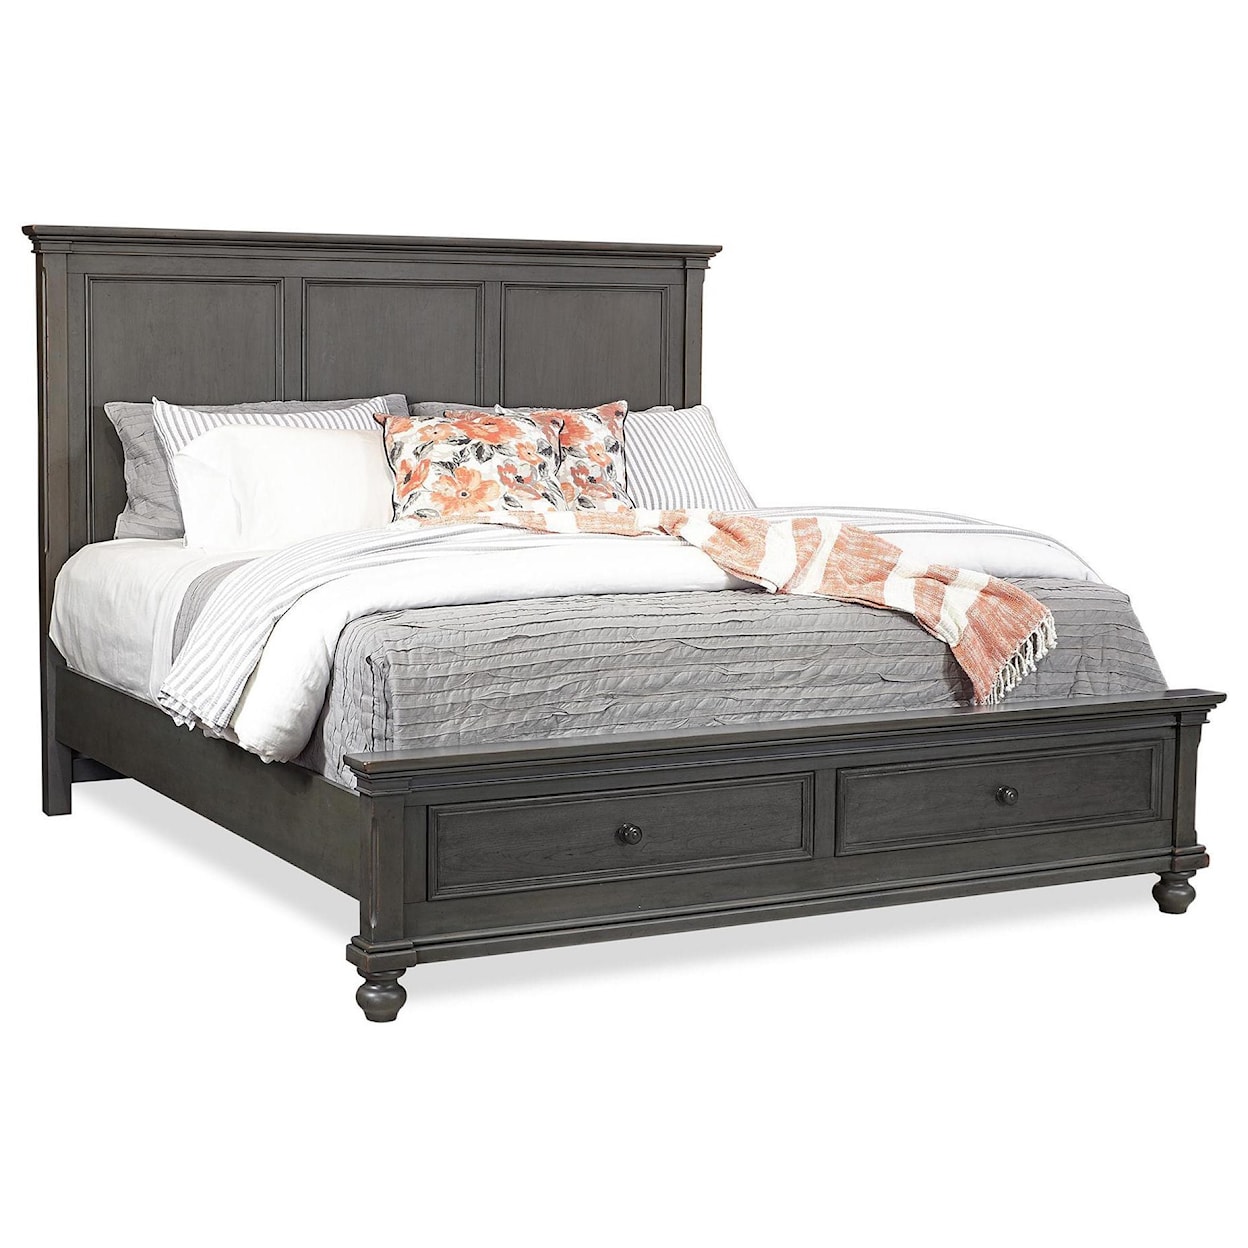 Aspenhome Oxford Cal King Storage Bed